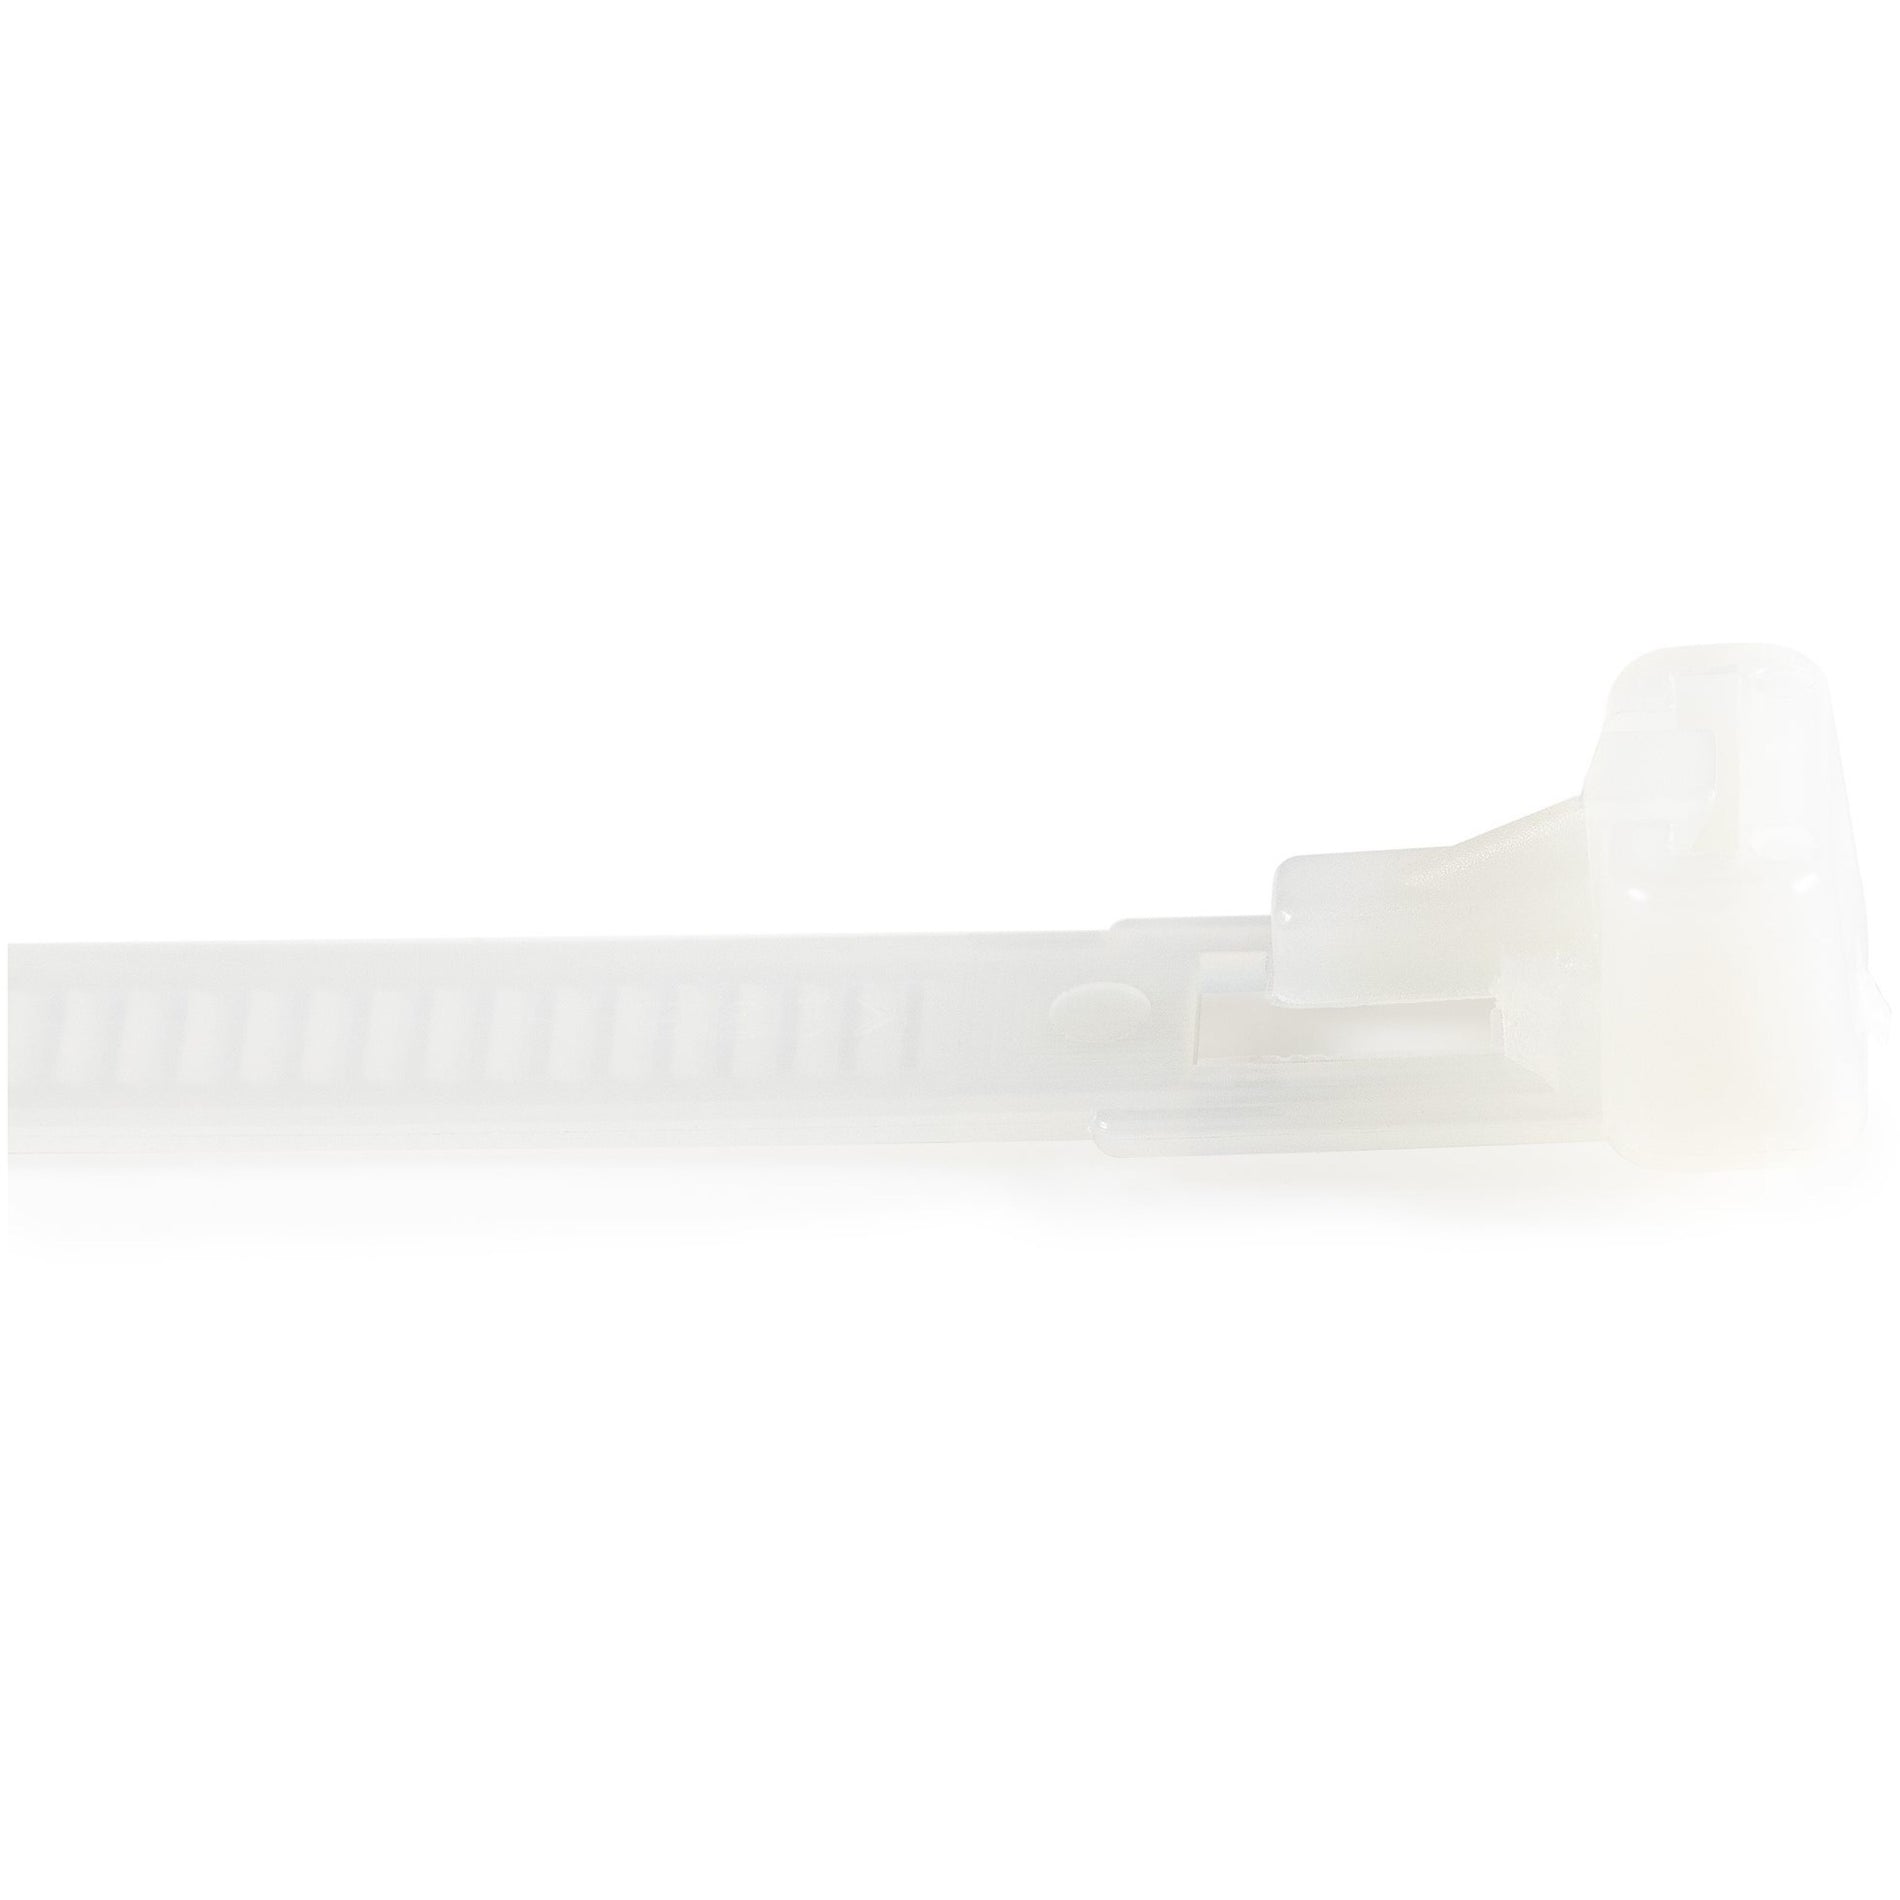 StarTech.com CBMZTRB8 100 Pack - 8 in. White Cable Ties, Resealable, TAA Compliant, 2 Year Warranty